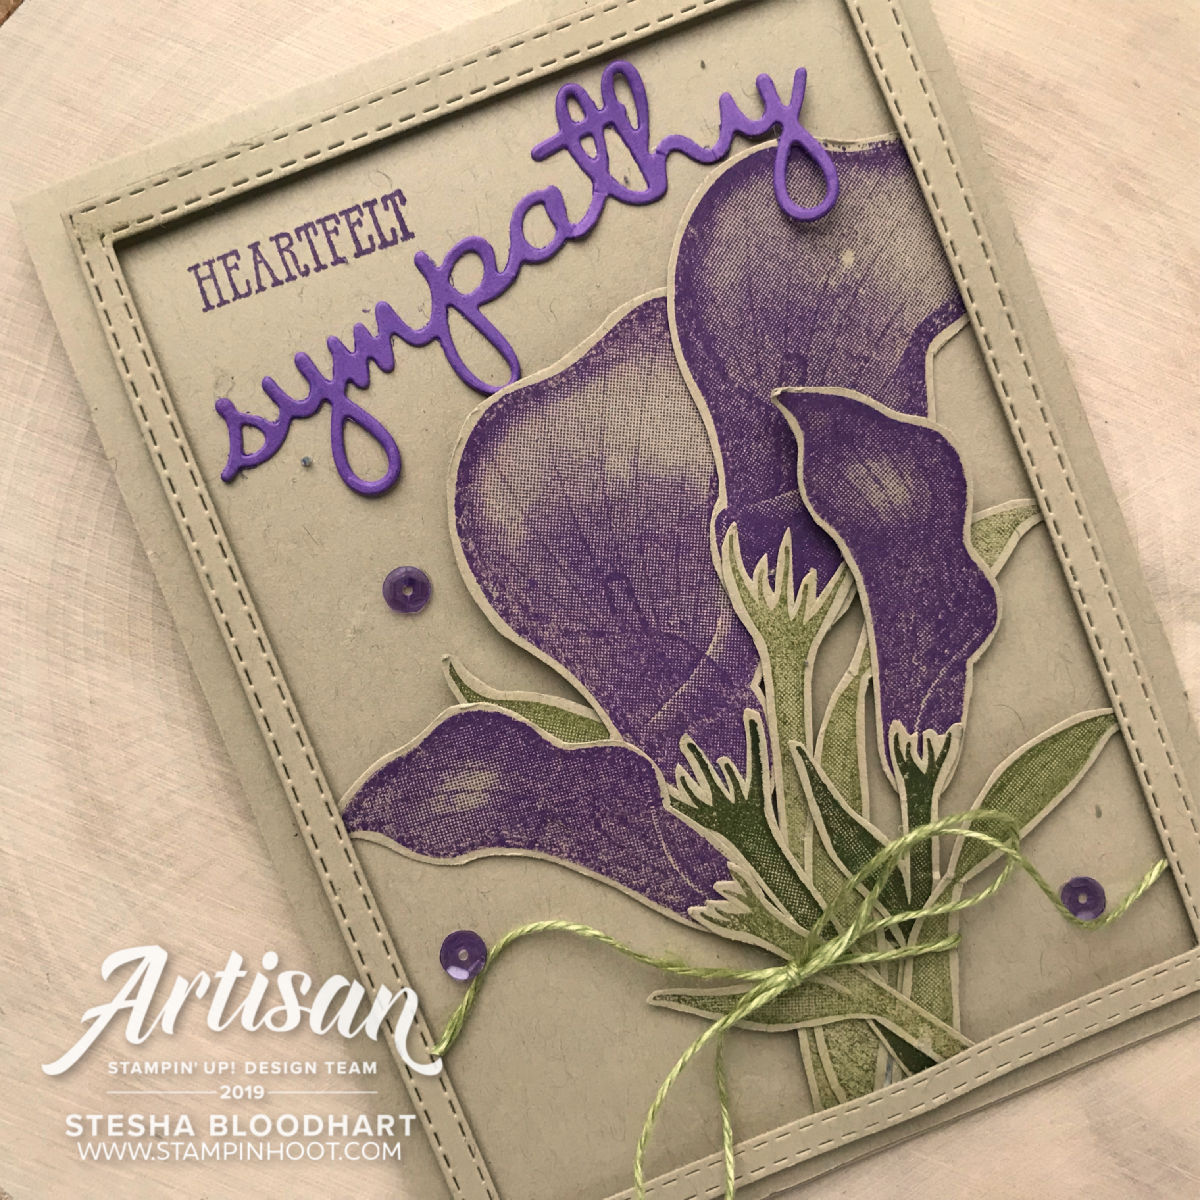 Lasting Lily Sale-A-Bration Stamp Set by Stampin' Up! Free with $100 Purchase Sympathy Card Created by Stesha Bloodhart, Stampin' Hoot! 2019 Artisan Design Team